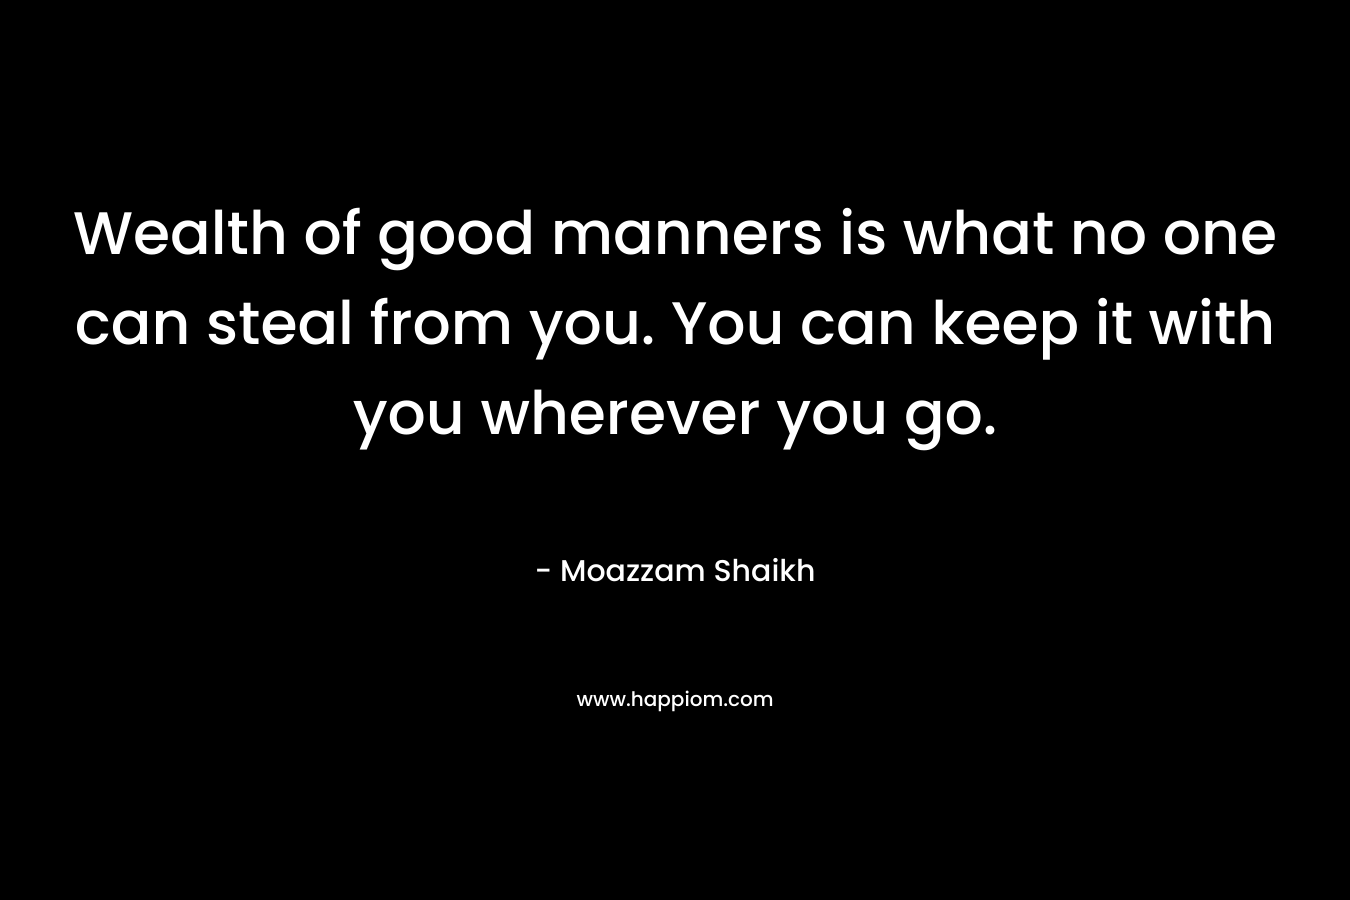 Wealth of good manners is what no one can steal from you. You can keep it with you wherever you go.